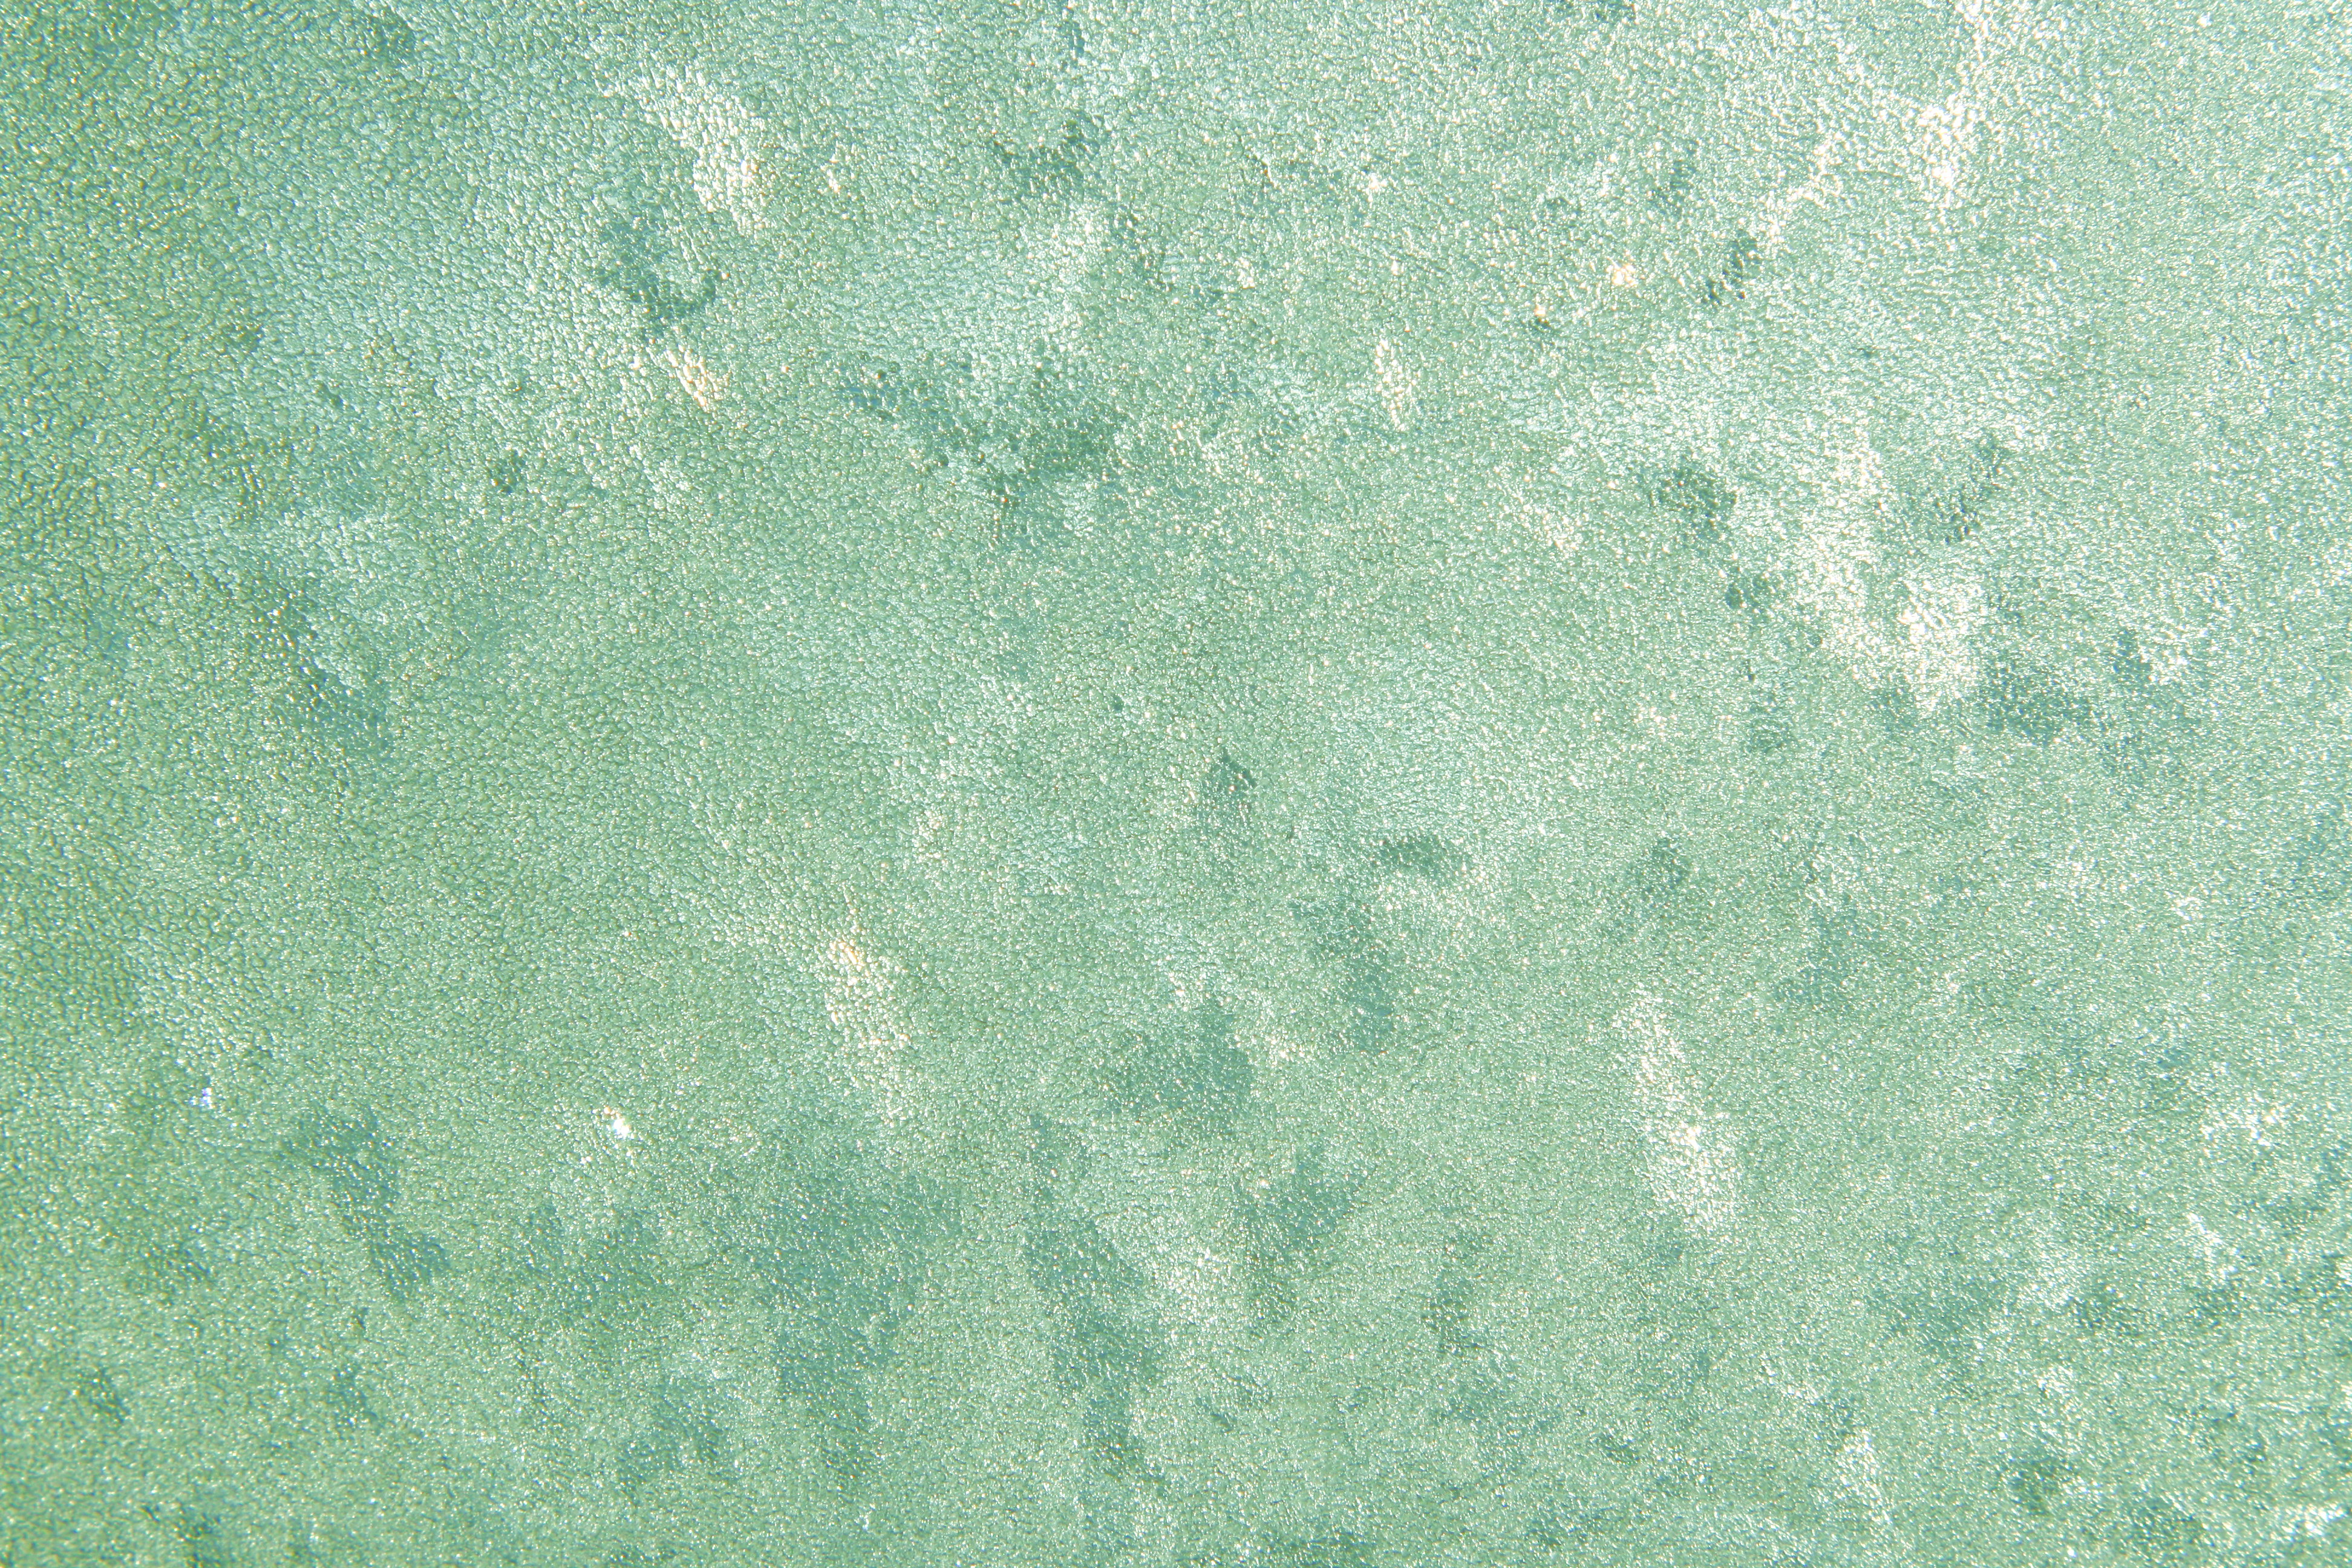 Frost on Glass Close Up Texture Colorized Seafoam Green Picture. Free Photograph. Photo Public Domain